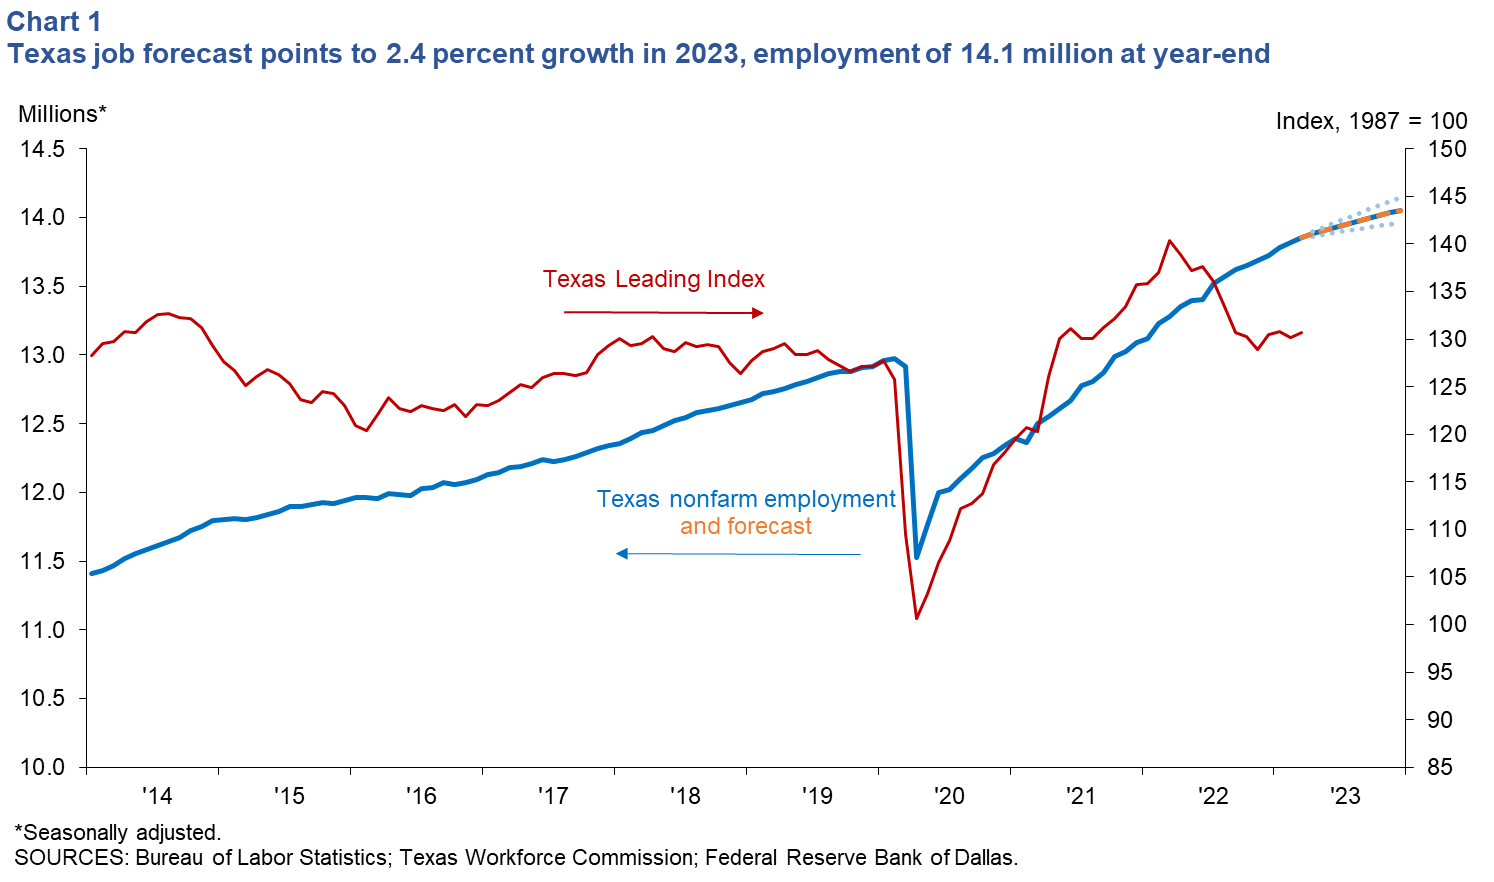 Texas job forecast points to 2.4 percent growth in 2023, employment of 14.1 million at year-end